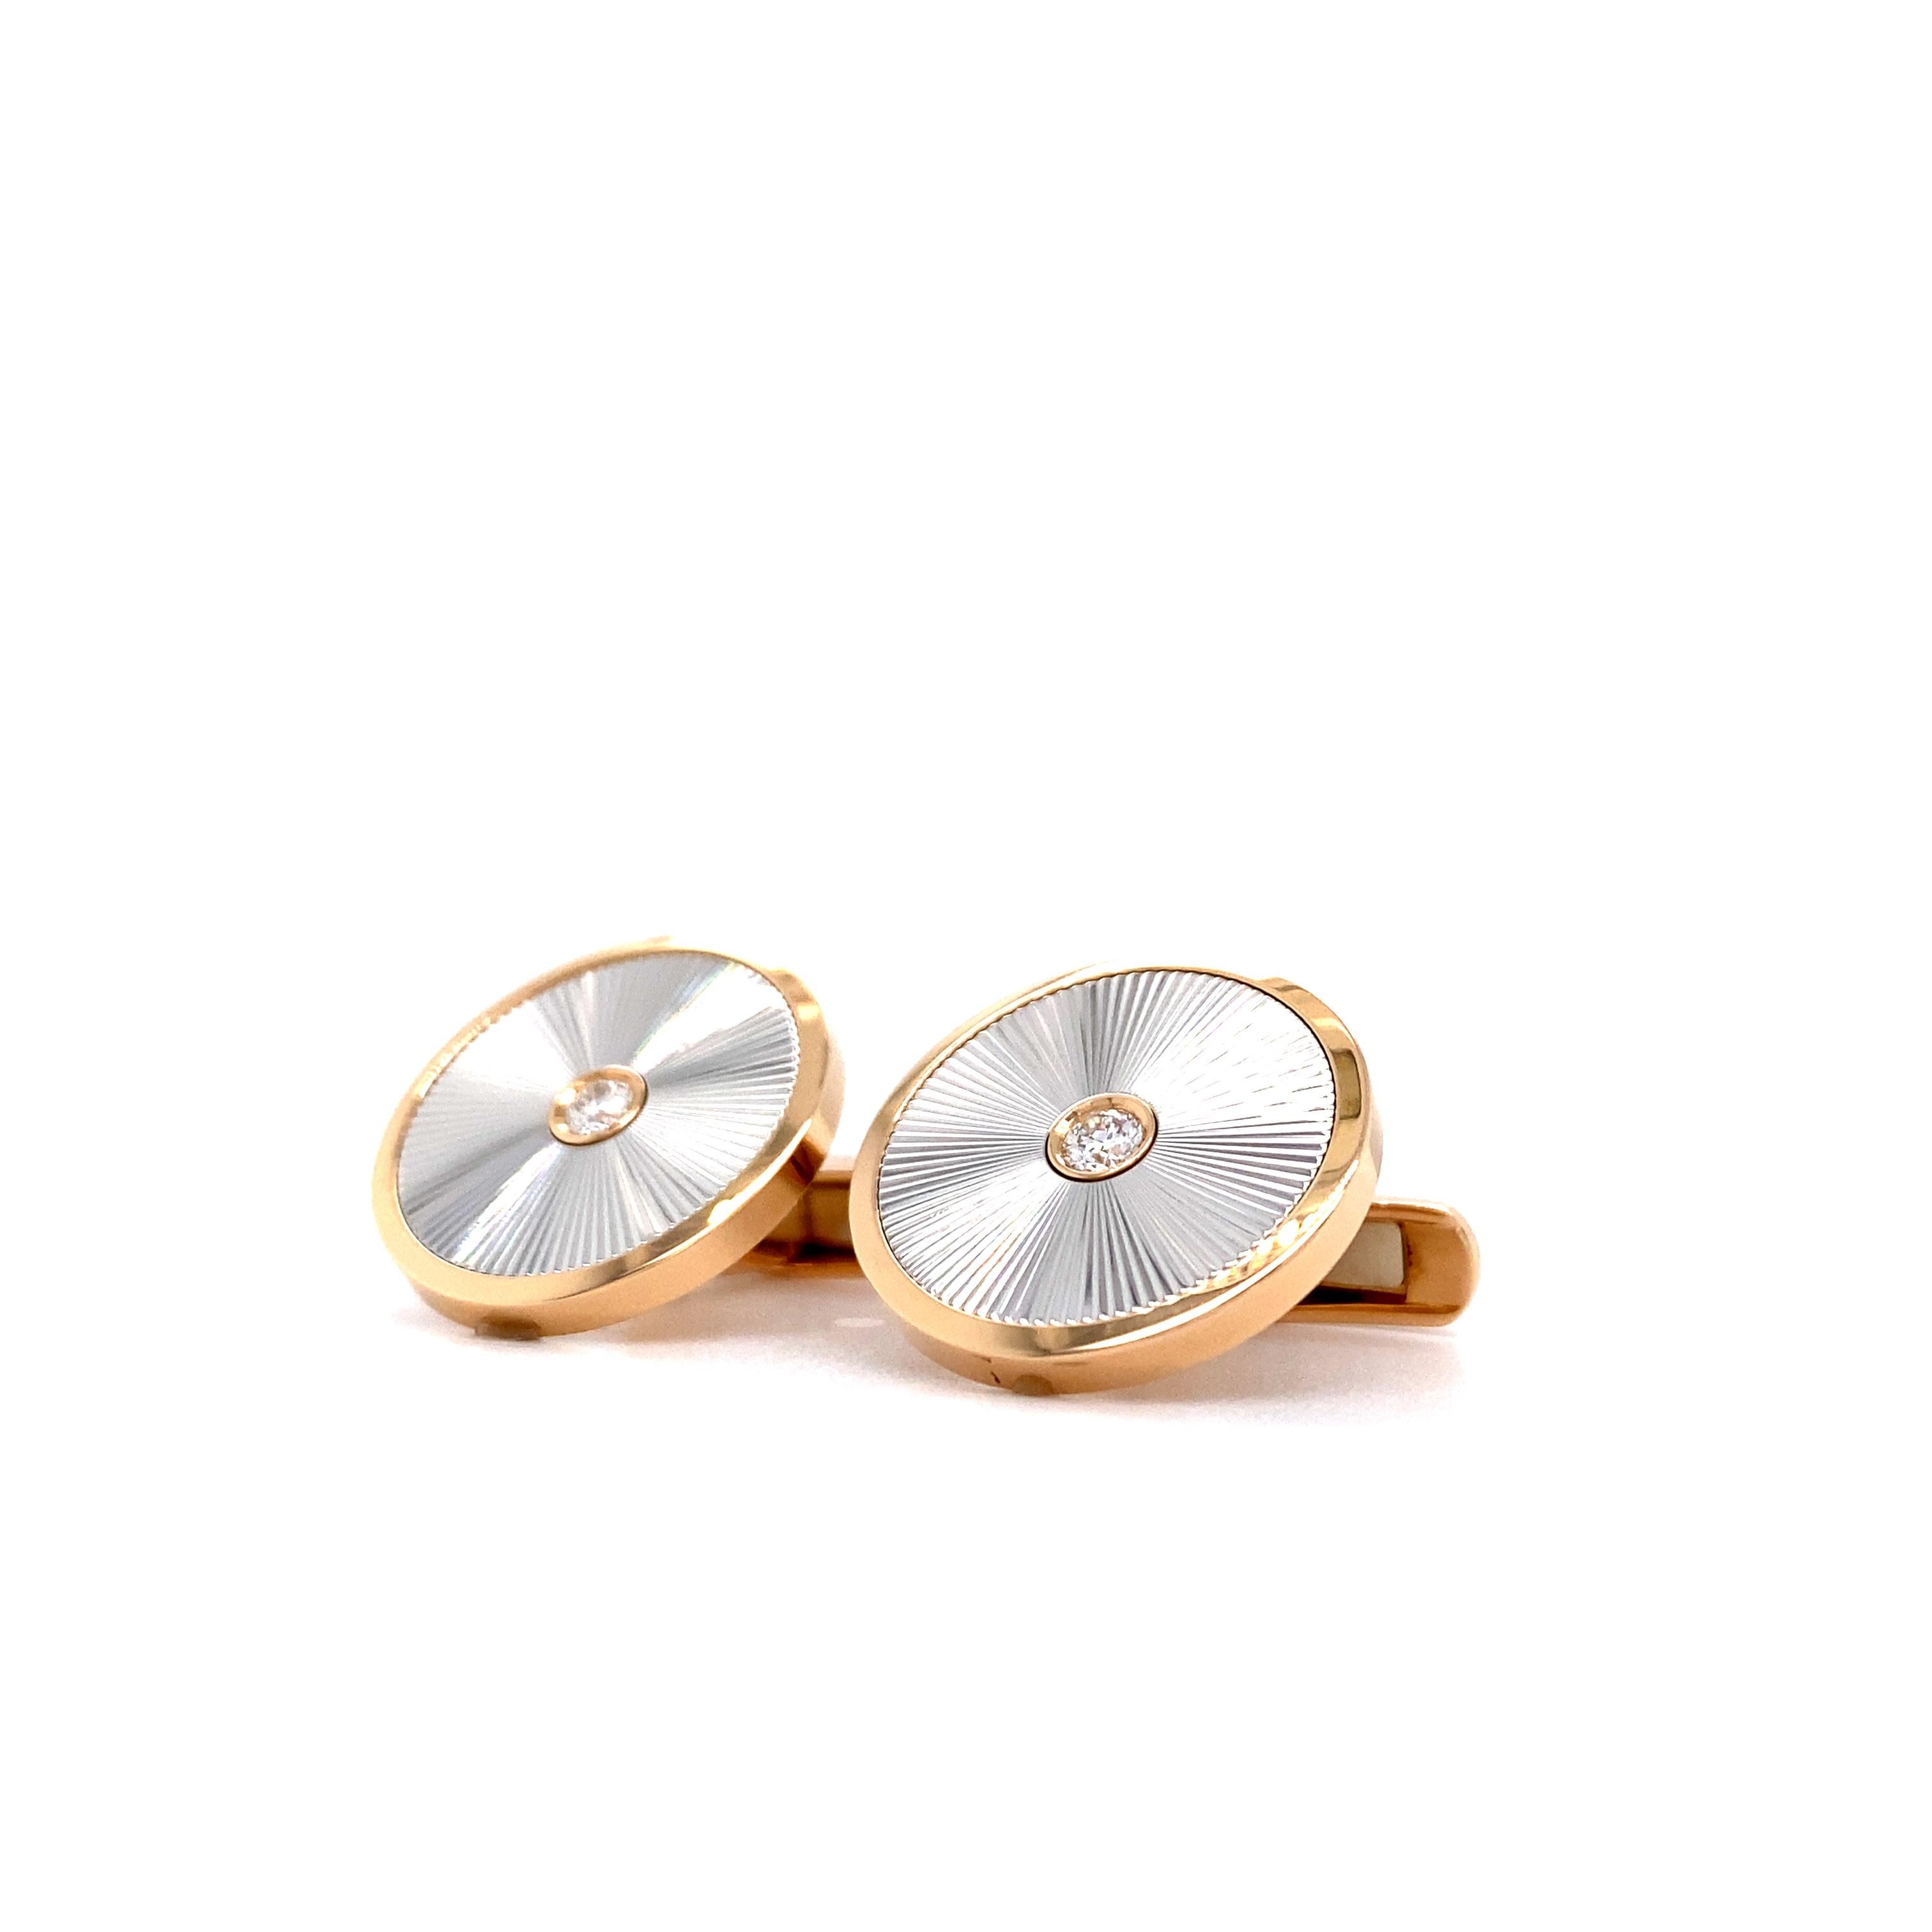 Starburst limited edition round cufflinks in rose gold & white gold with diamonds 

Cuff links, 750/- RG/WG, 2 diamonds total 0.20 ct, G VS
Reference: V1611/00/00/10C
Material: 750/- rose gold/white gold
Diamonds: 2 diamonds total 0.20 ct, G